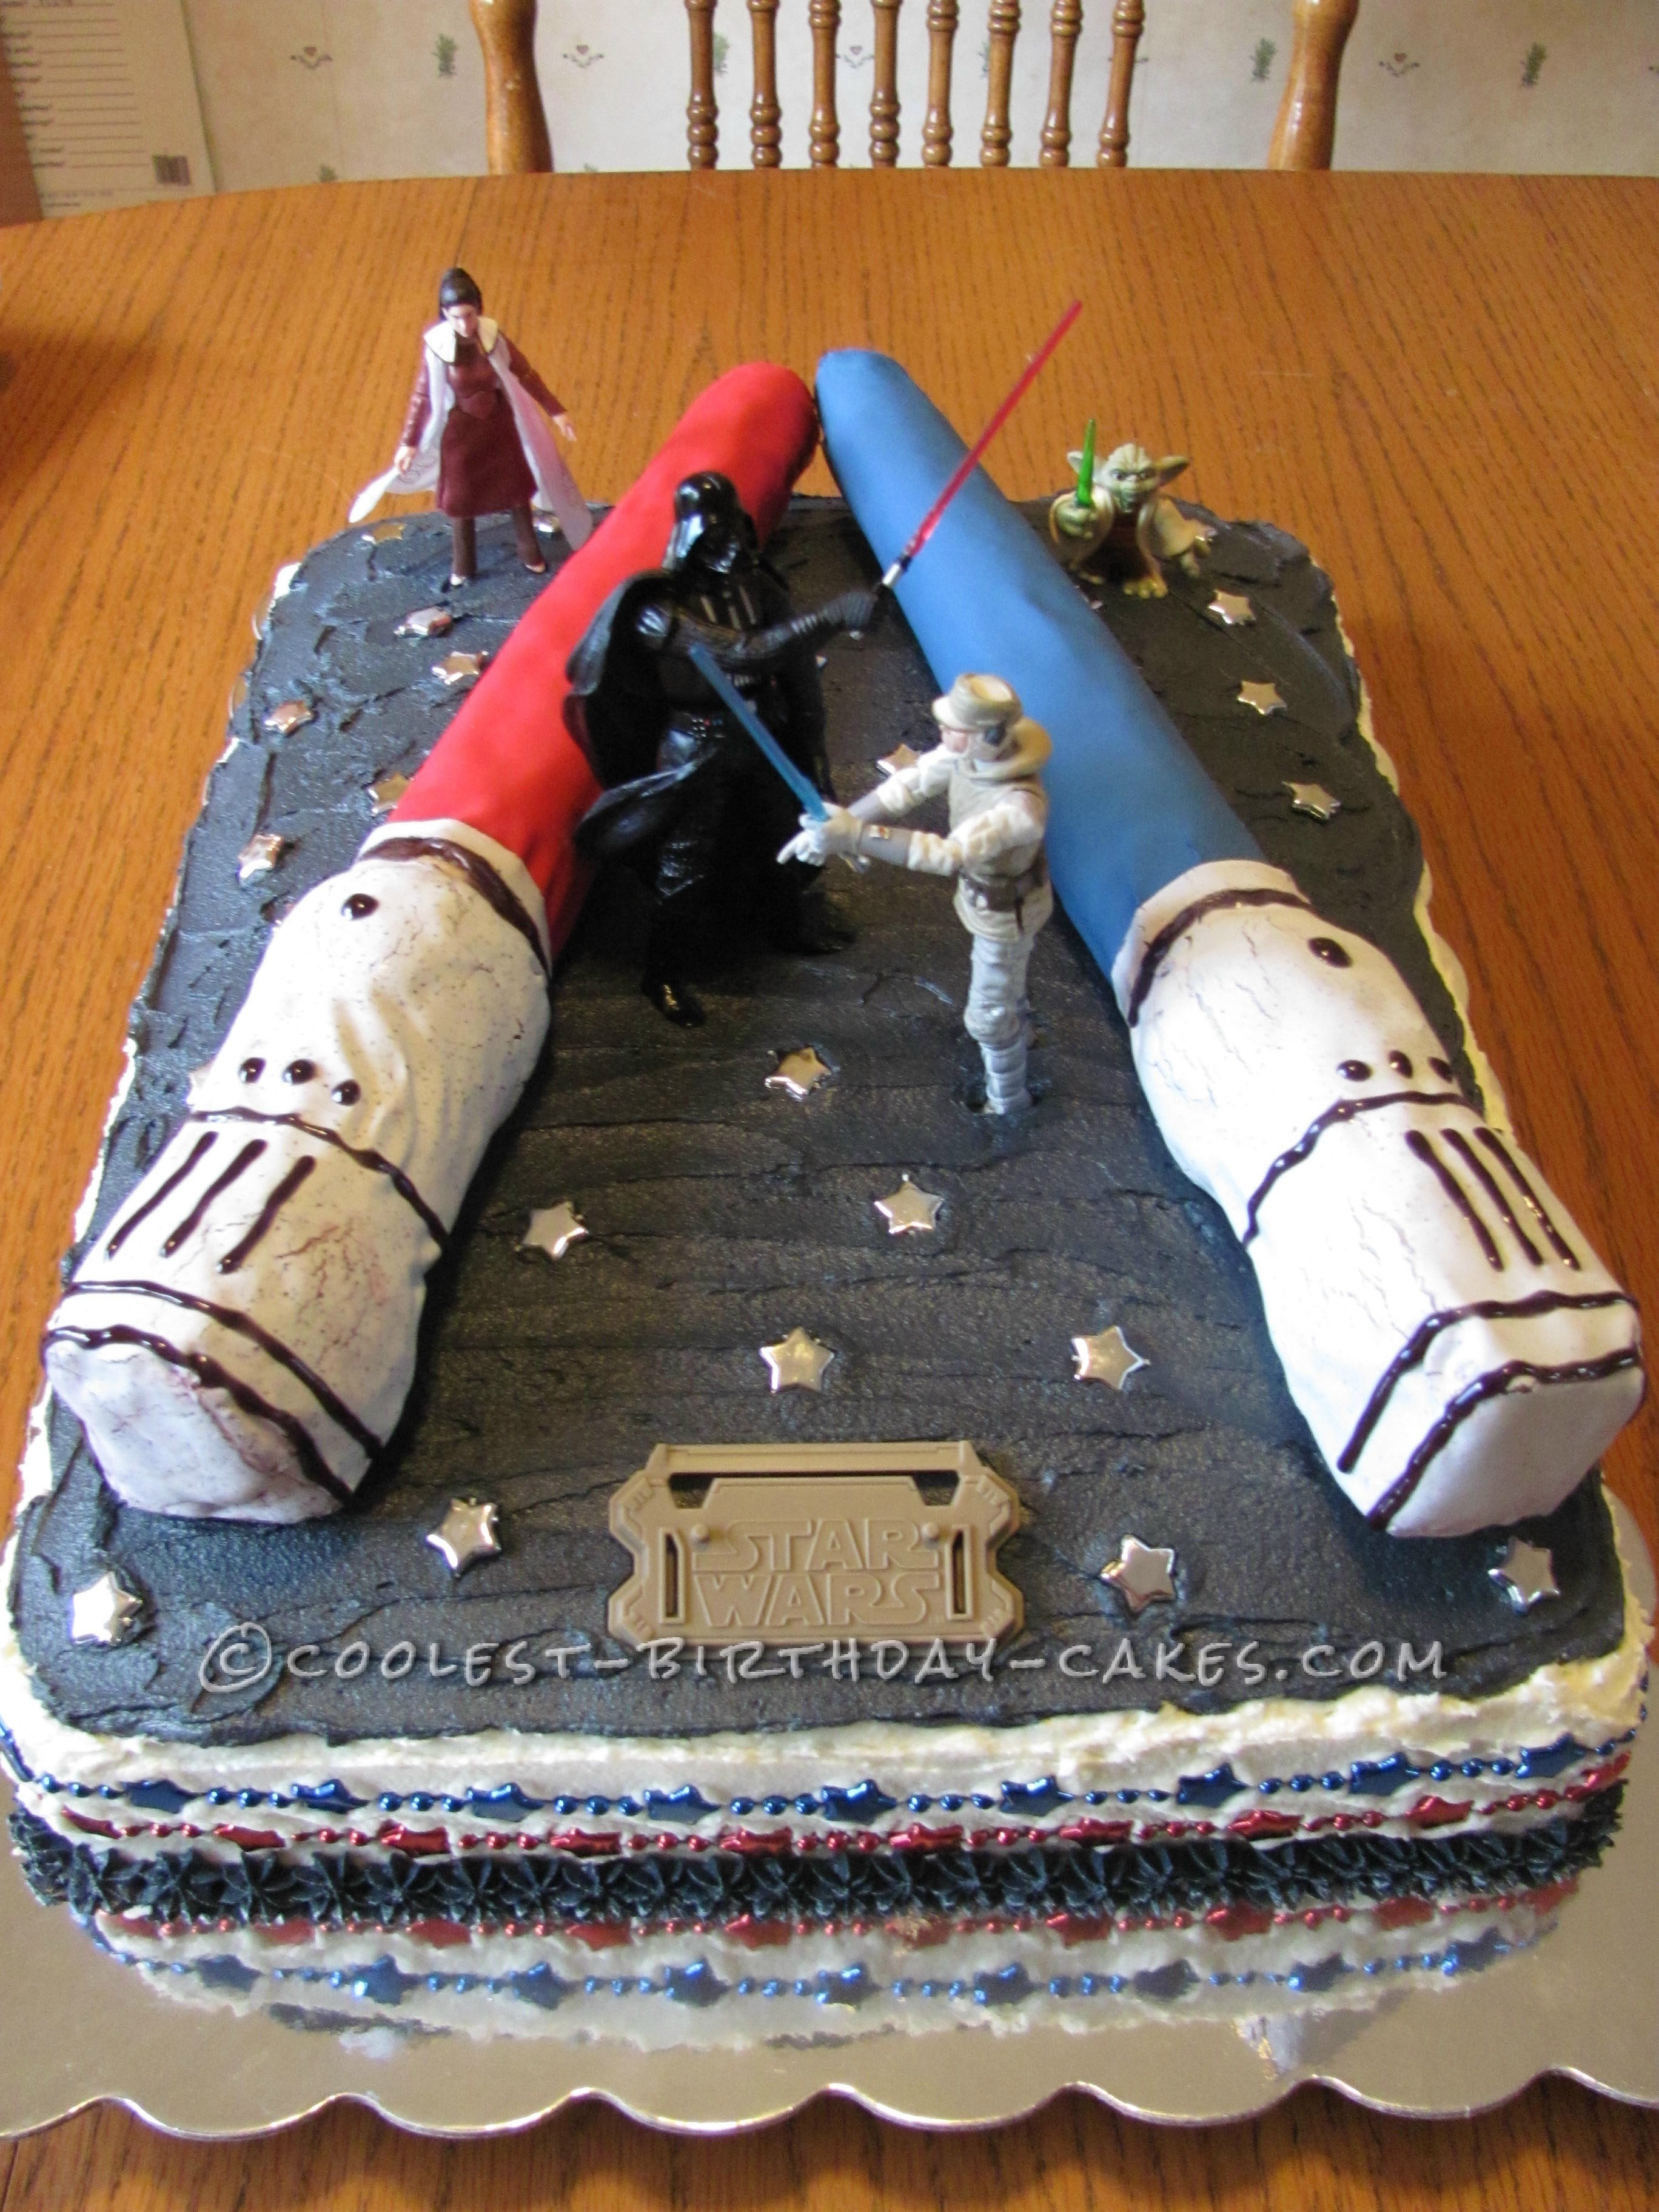 Coolest "May the Force Be With You" Birthday Cake